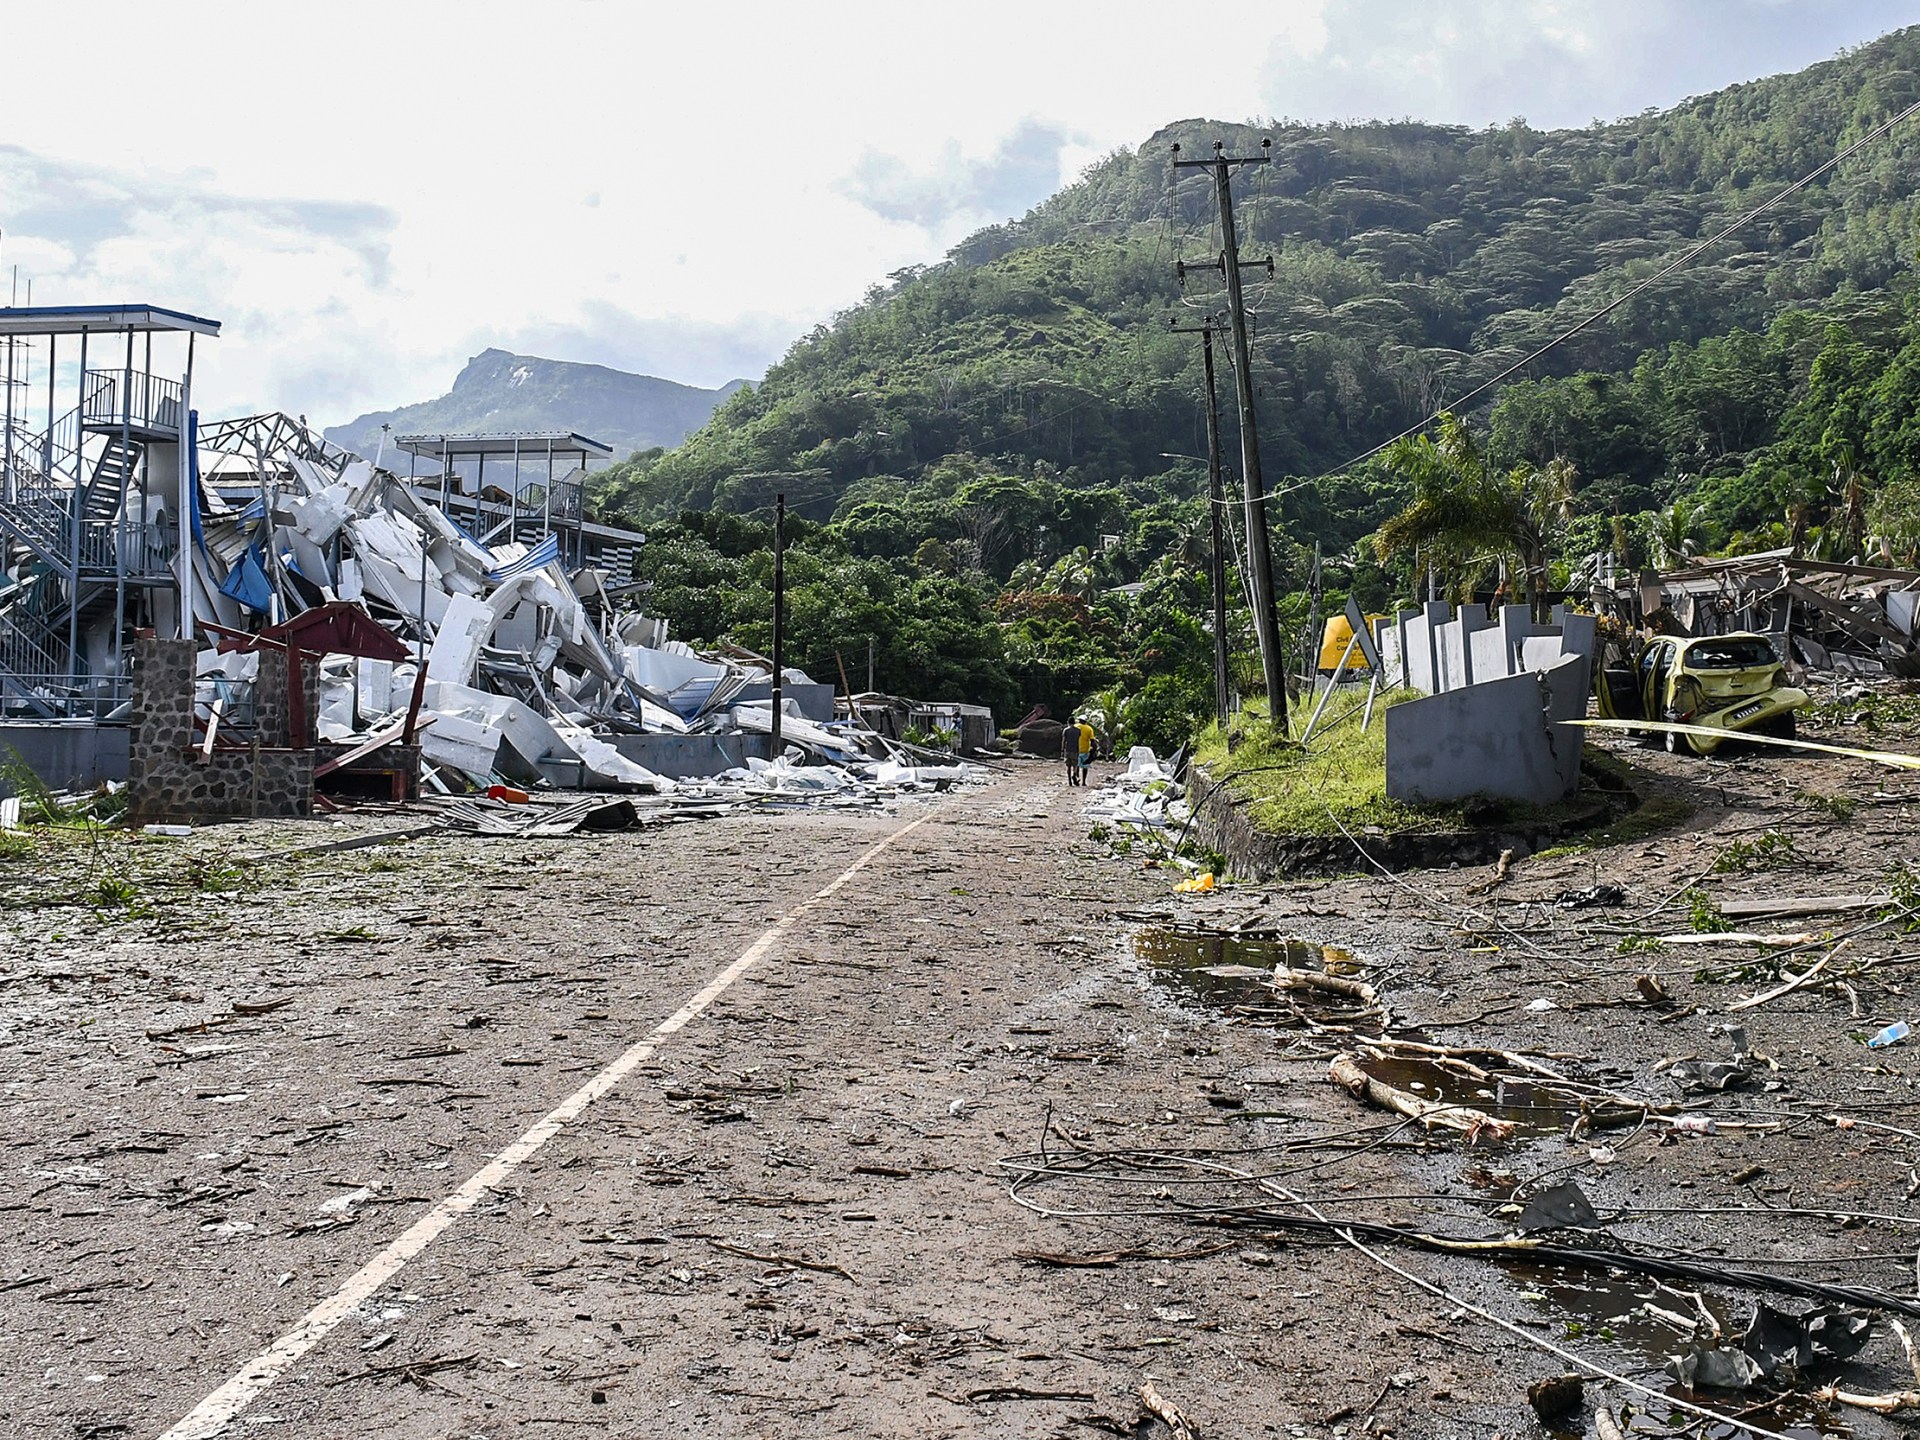 Seychelles under a state of emergency after explosion and flooding | Floods News #Seychelles #state #emergency #explosion #flooding #Floods #News